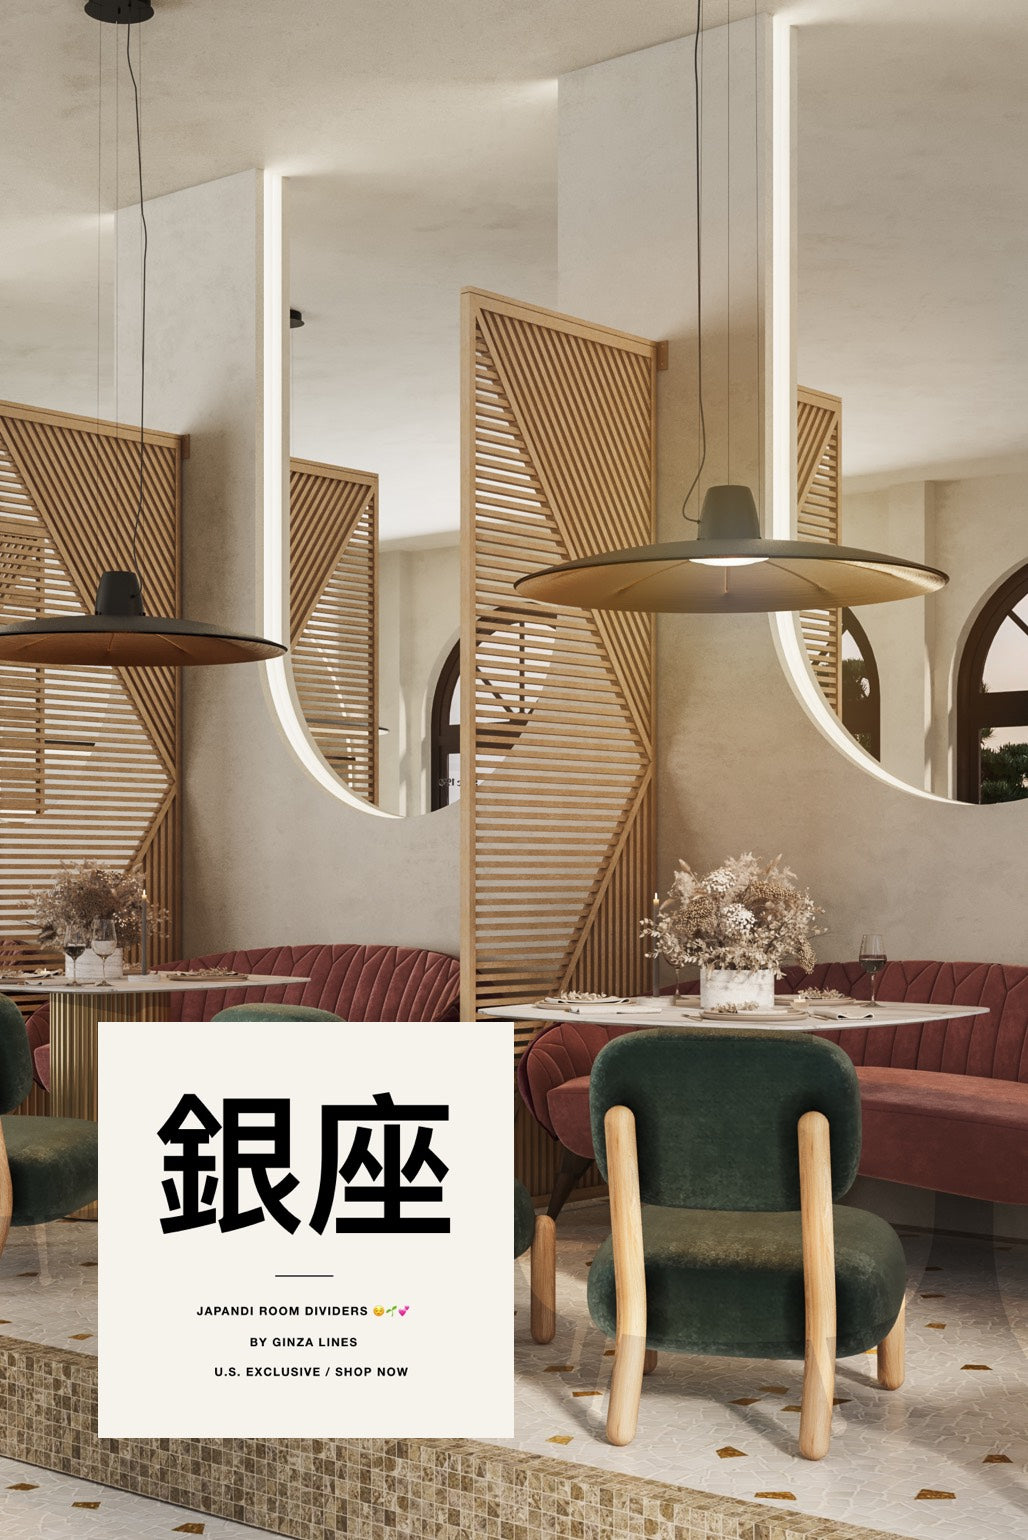 Japandi Room Dividers by Ginza Lines, exclusively in U.S. at Japandi Supply House